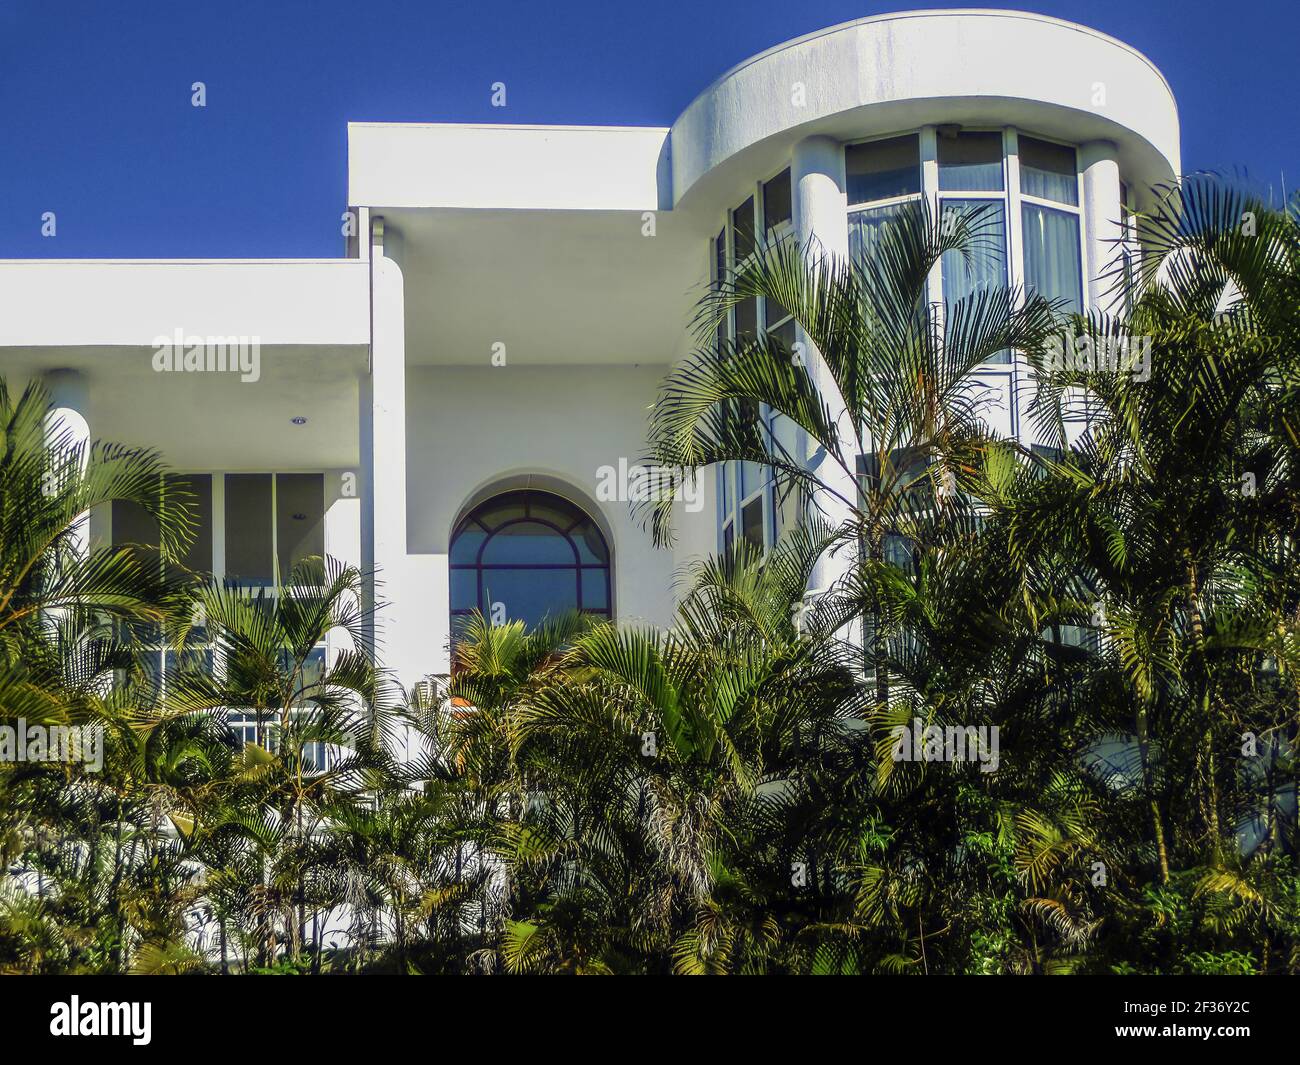 6-18-2014 Brisbane Australia beautiful luxury mansion in the suburbs partially hidden by tall palm trees against blue sky Stock Photo